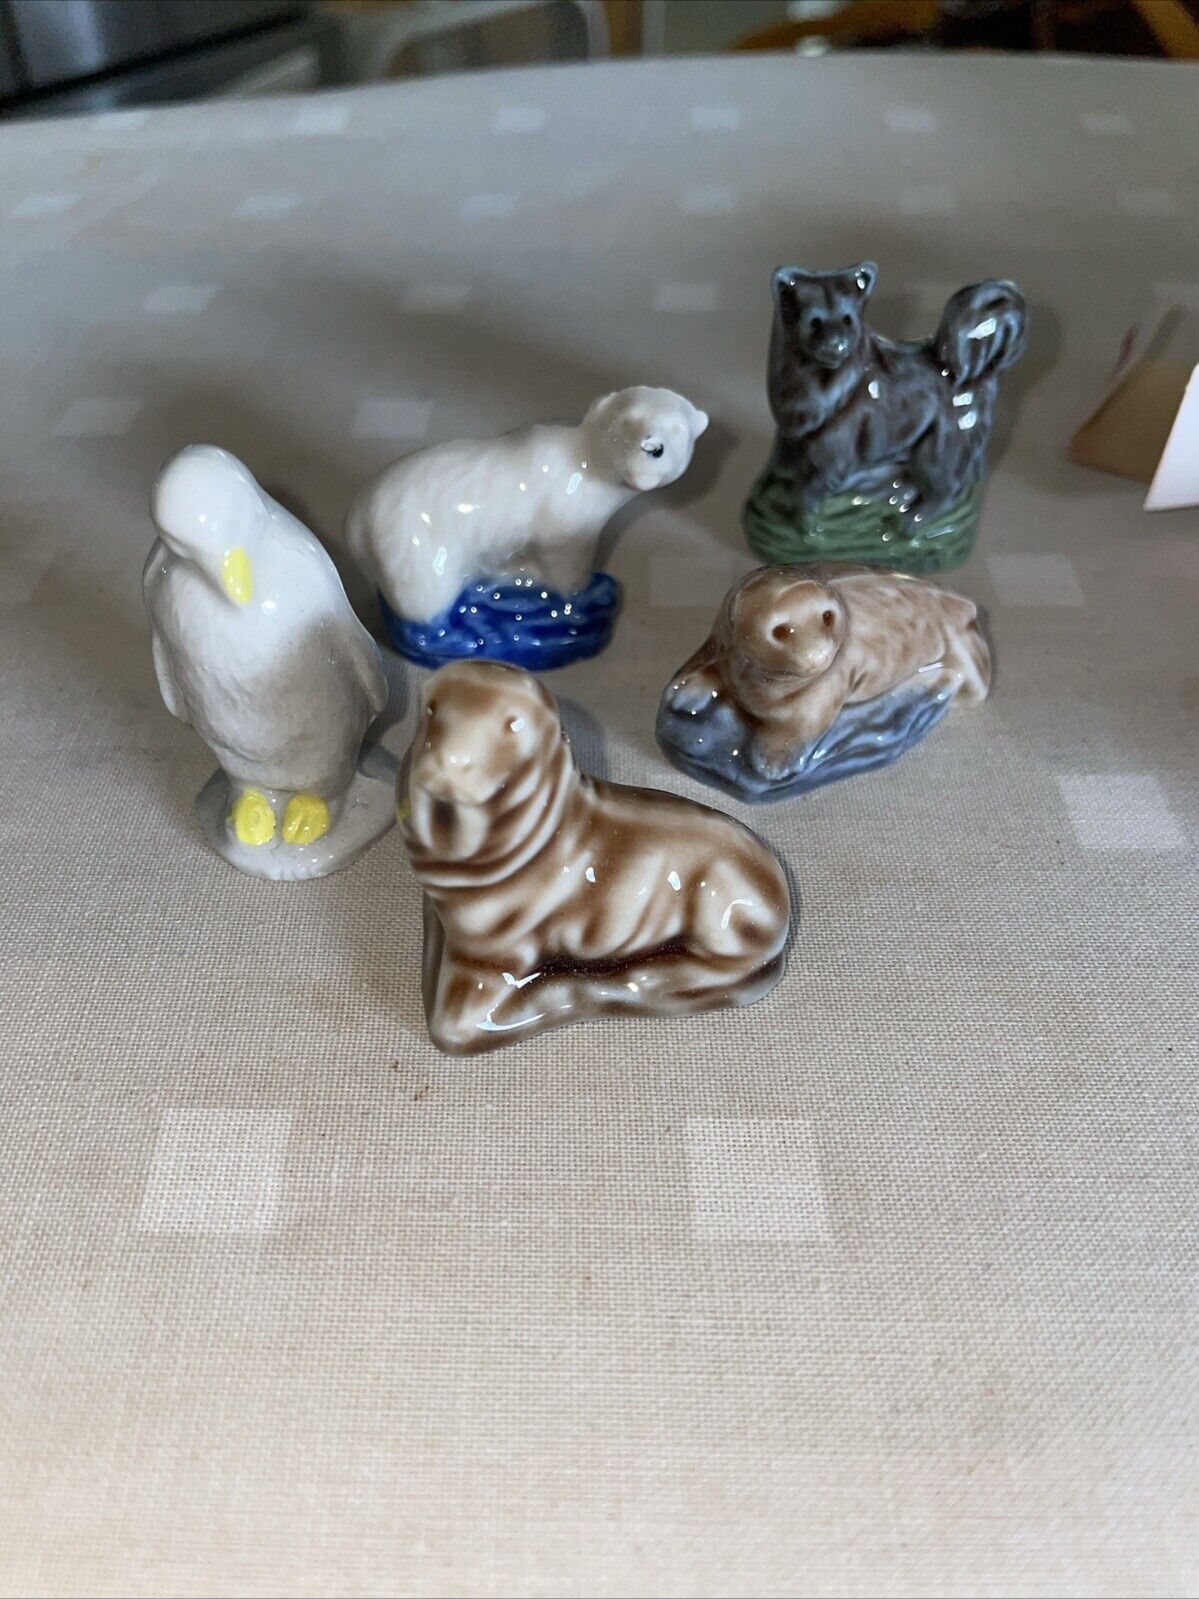 5 Wades Whimsies Arctic Animals In Original Boxes